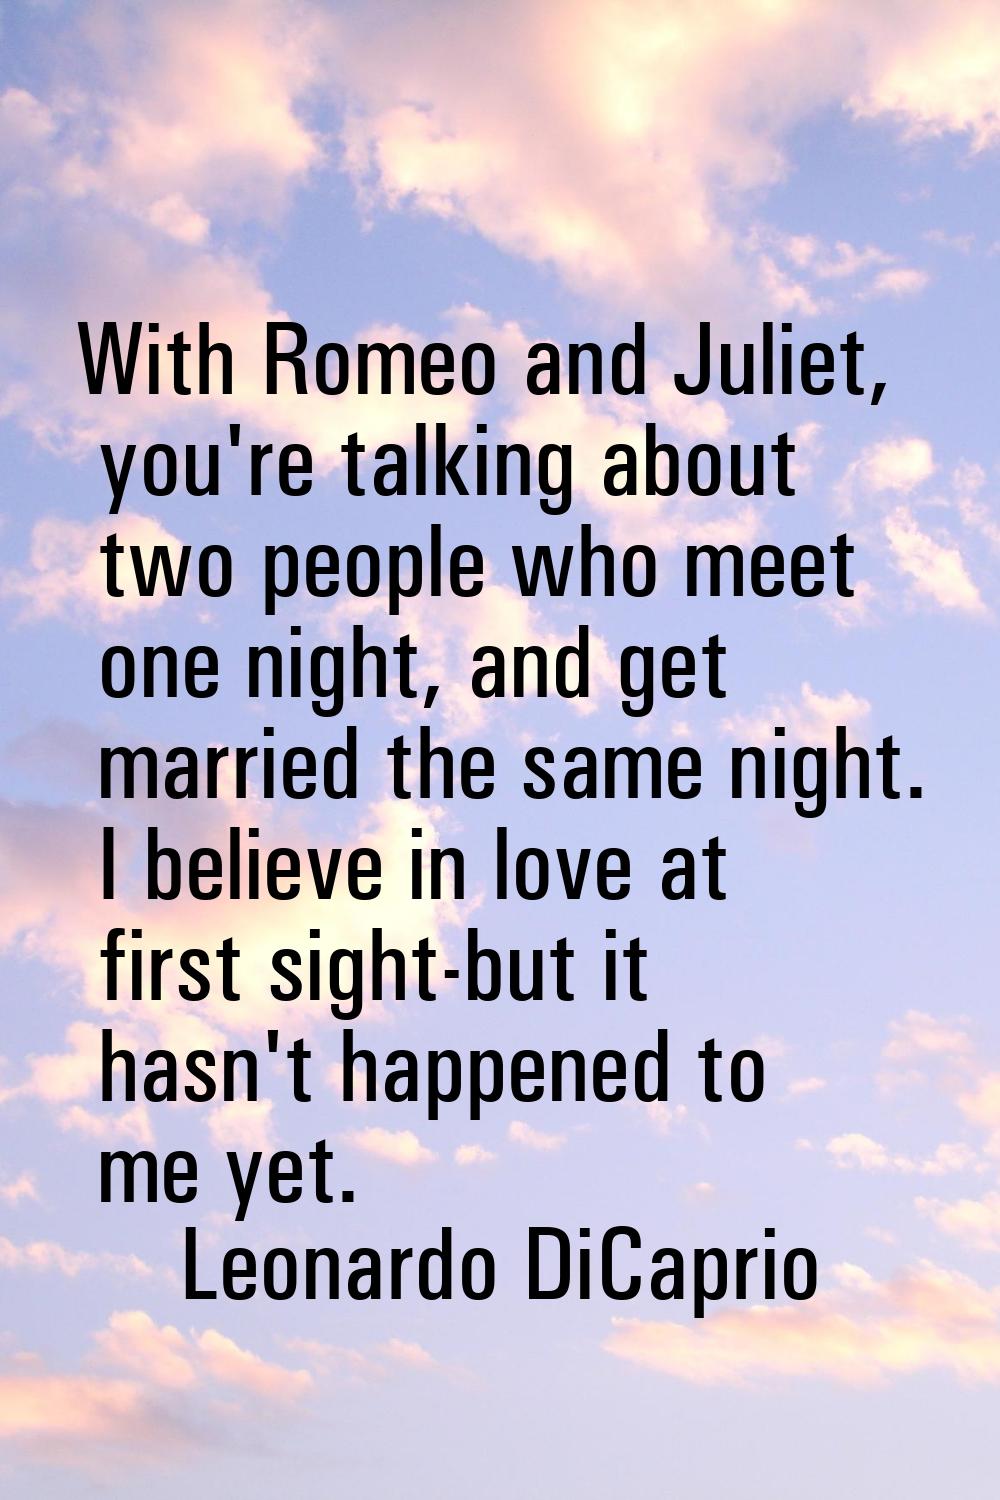 With Romeo and Juliet, you're talking about two people who meet one night, and get married the same